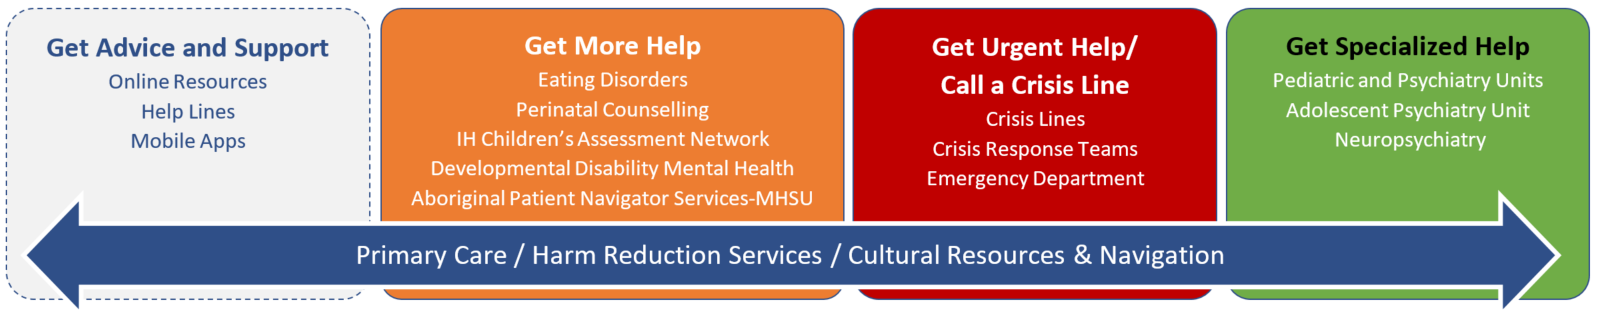 A diagram illustrating different mental health services for children & youth.